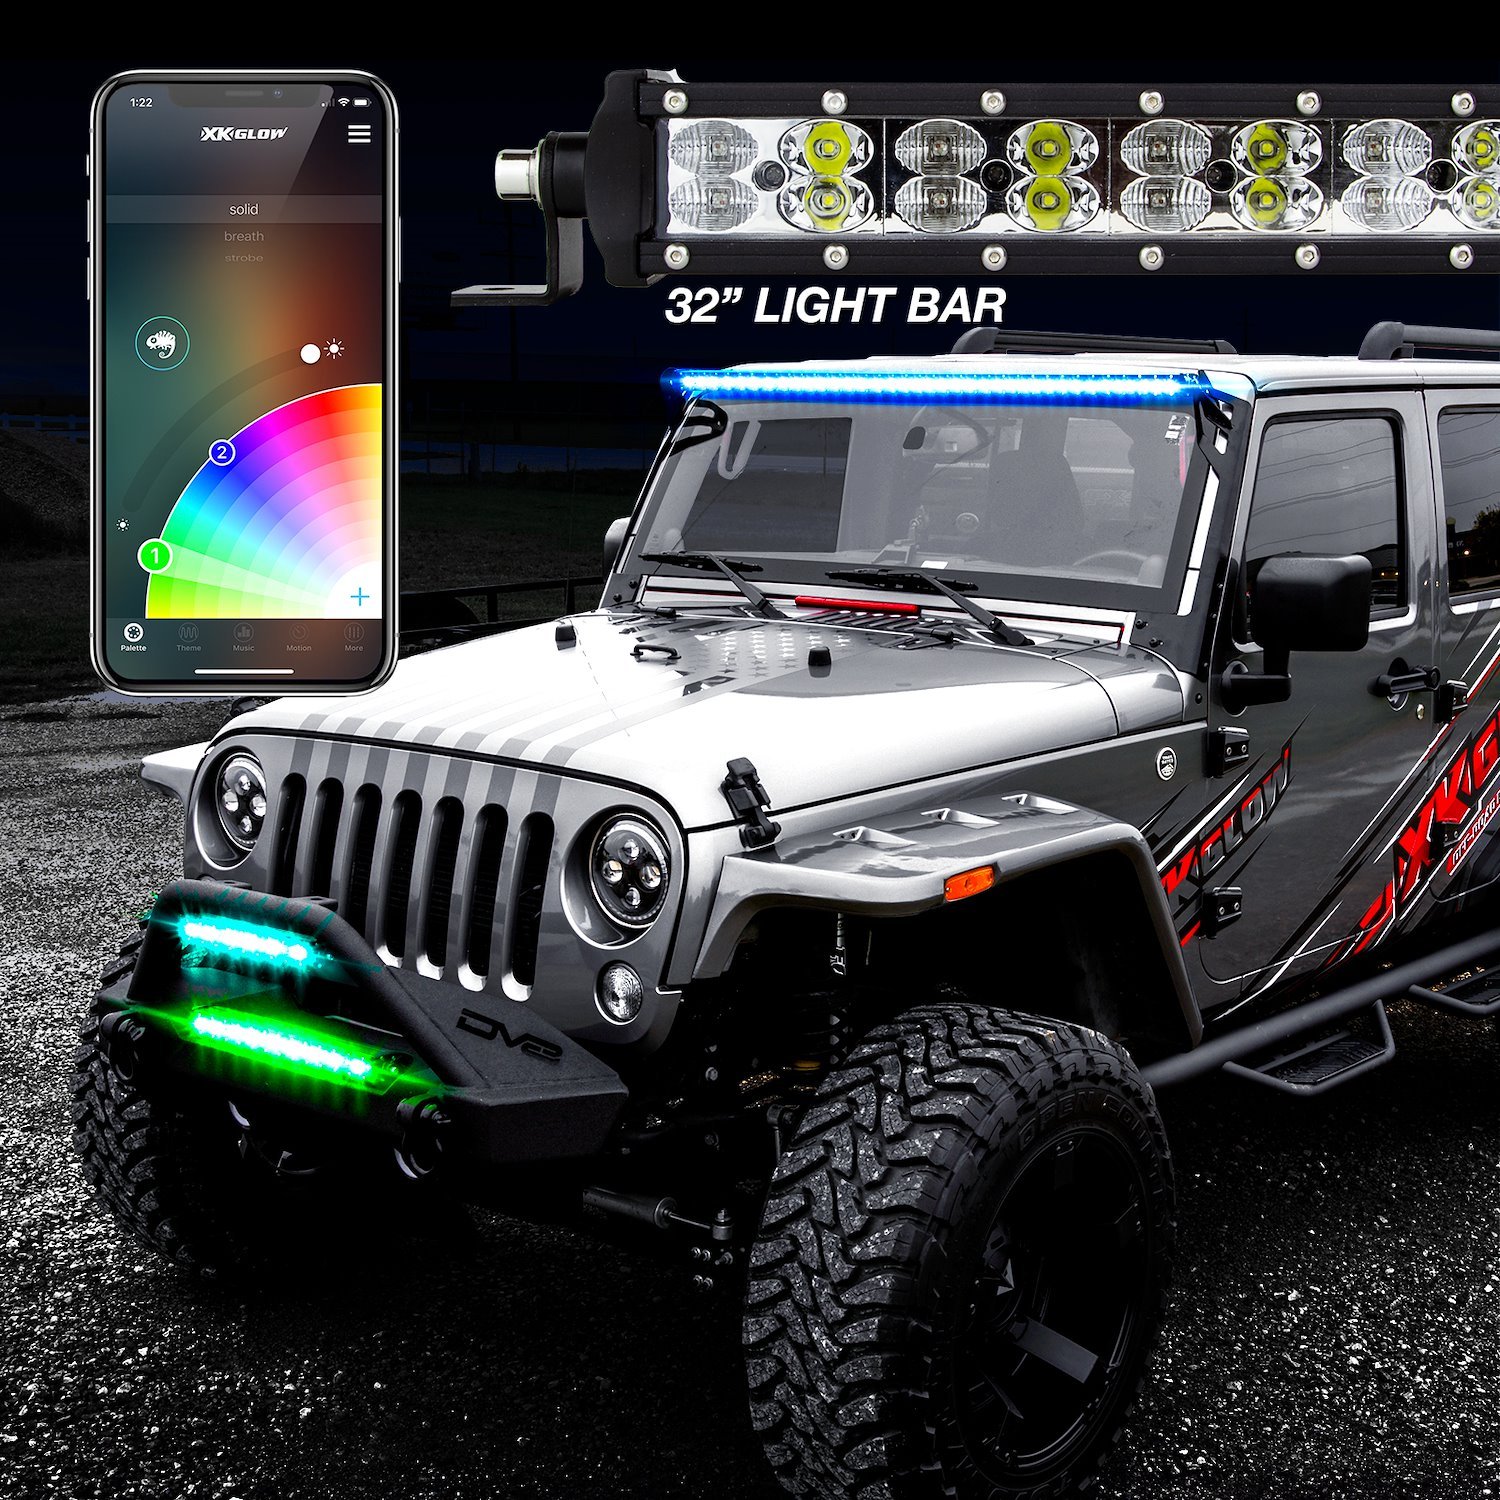 XK-BAR-32 32 in. RGBW Light Bar, High-Power Offroad Work/Hunting Light, w/Built-in XKCHROME Bluetooth Controller, Universal Fit